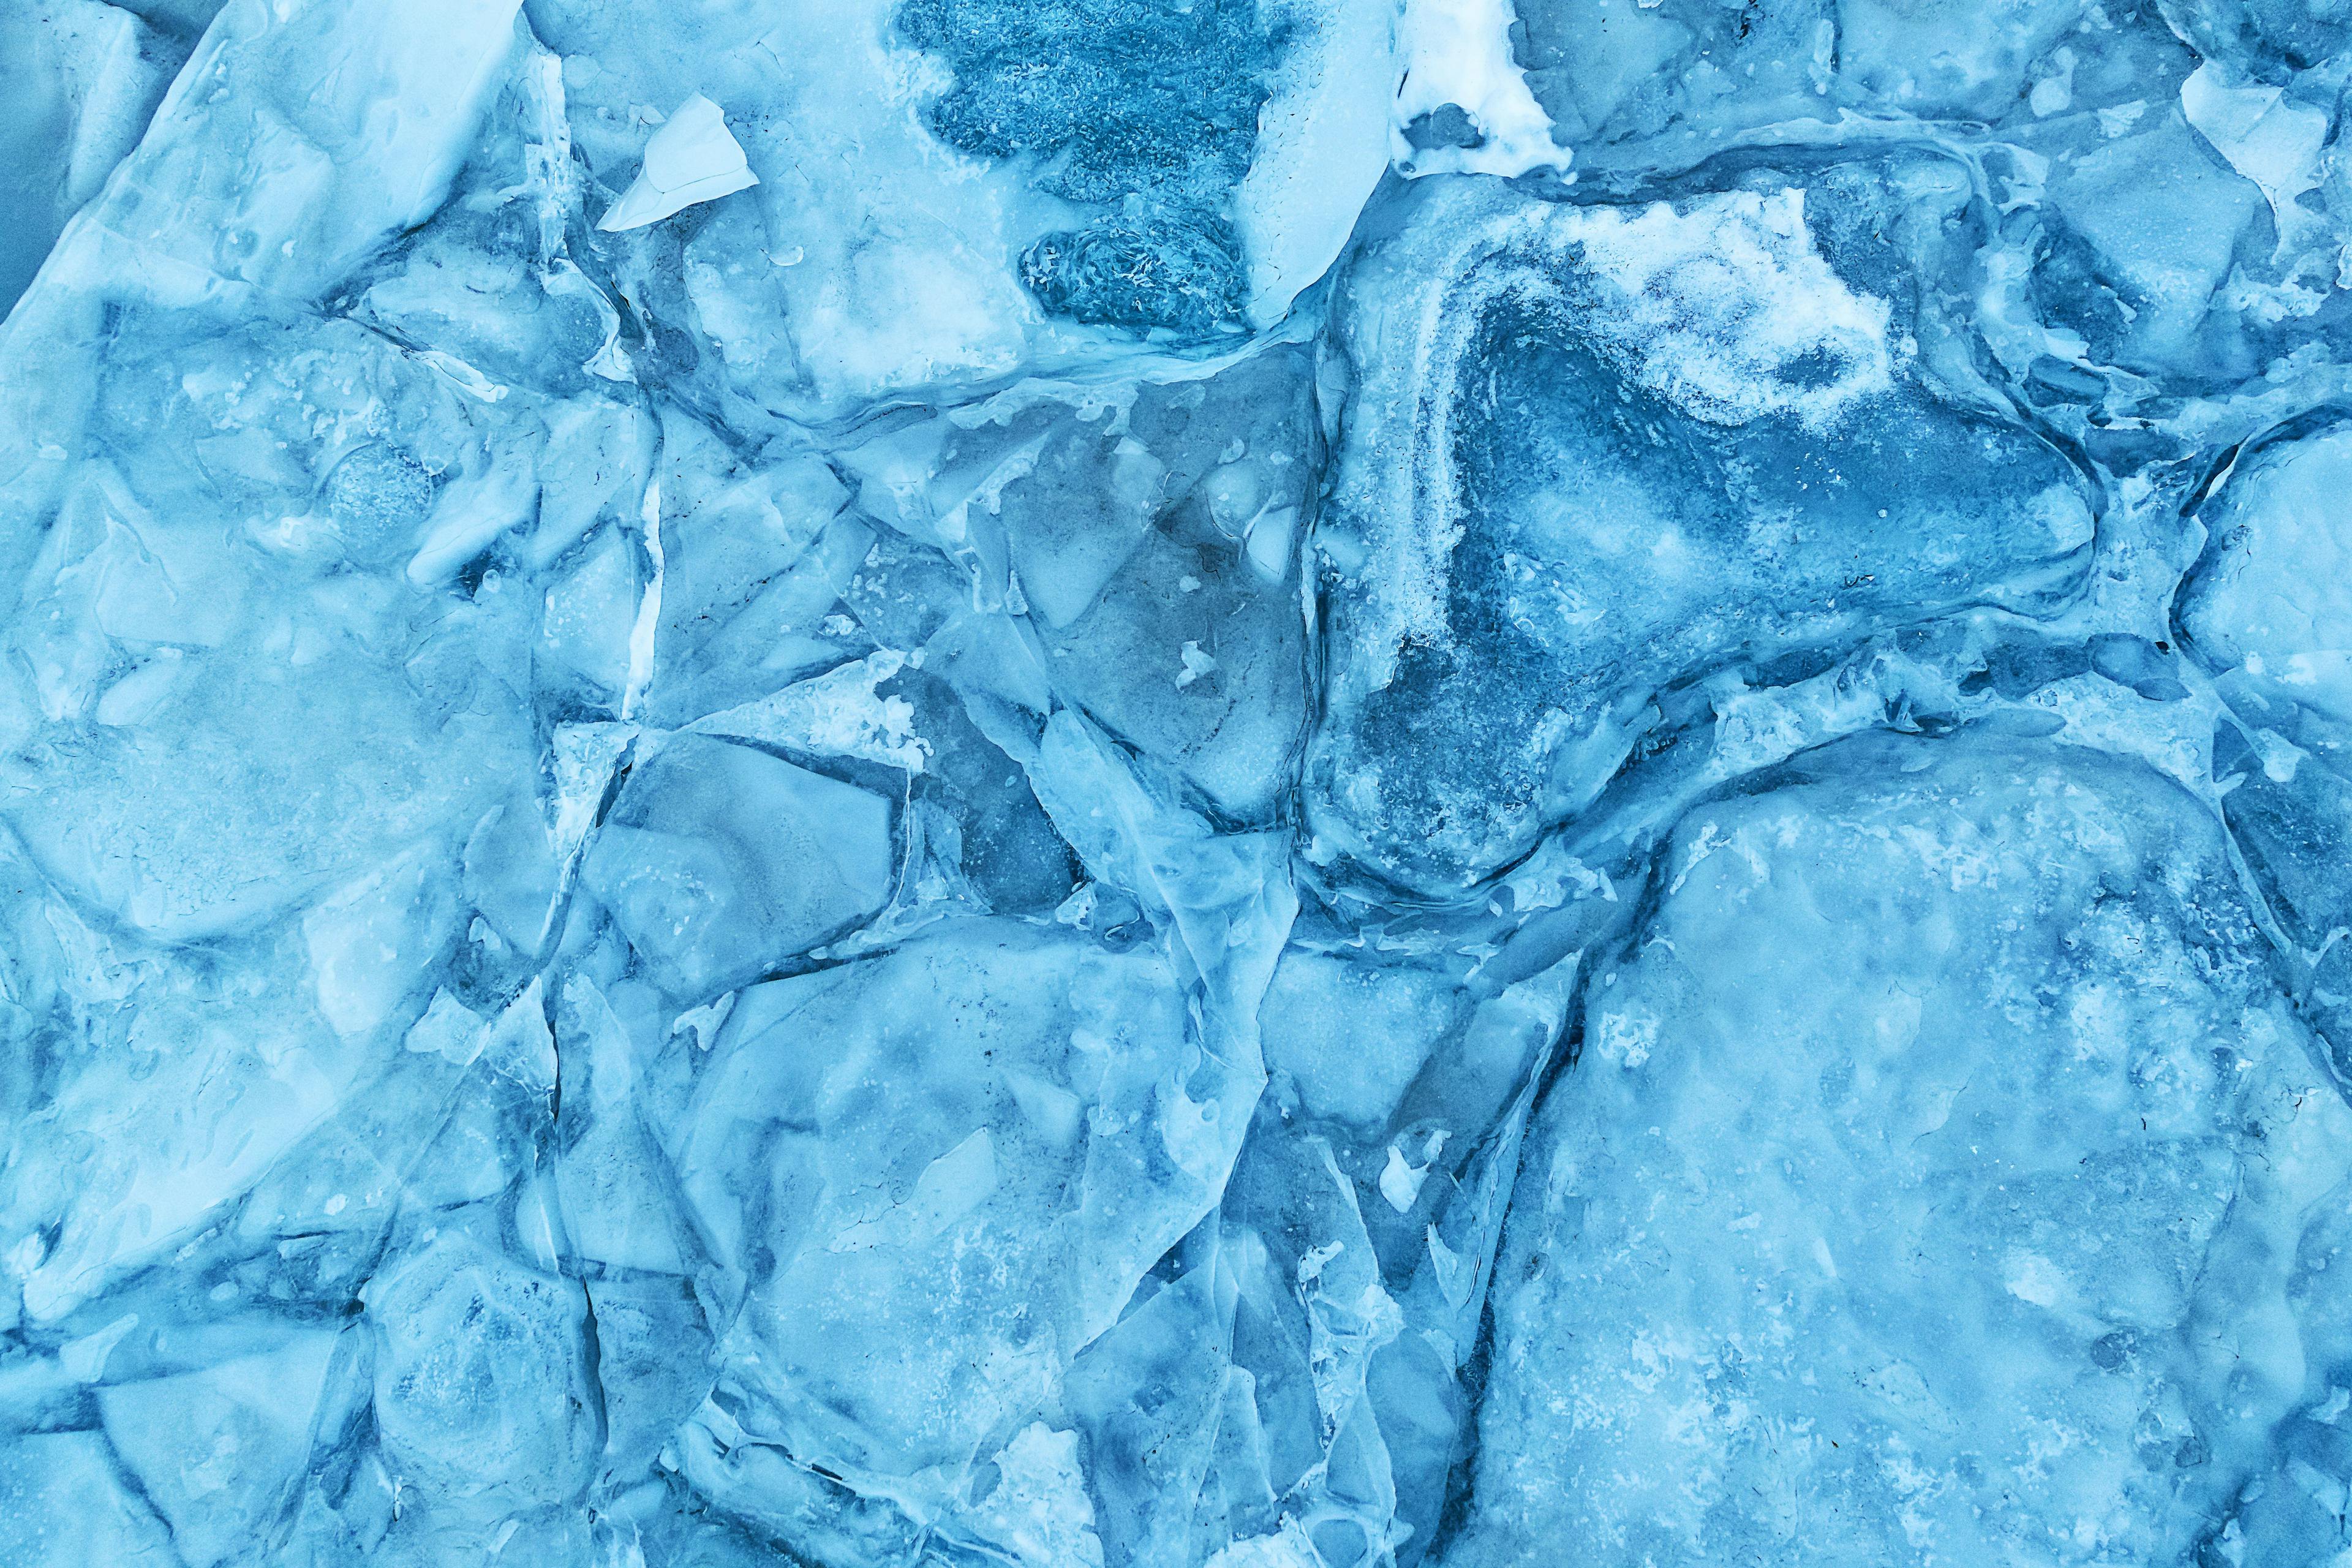 Texture of glacier ice in close-up detail | Image Credit: © Jag_cz - stock.adobe.com